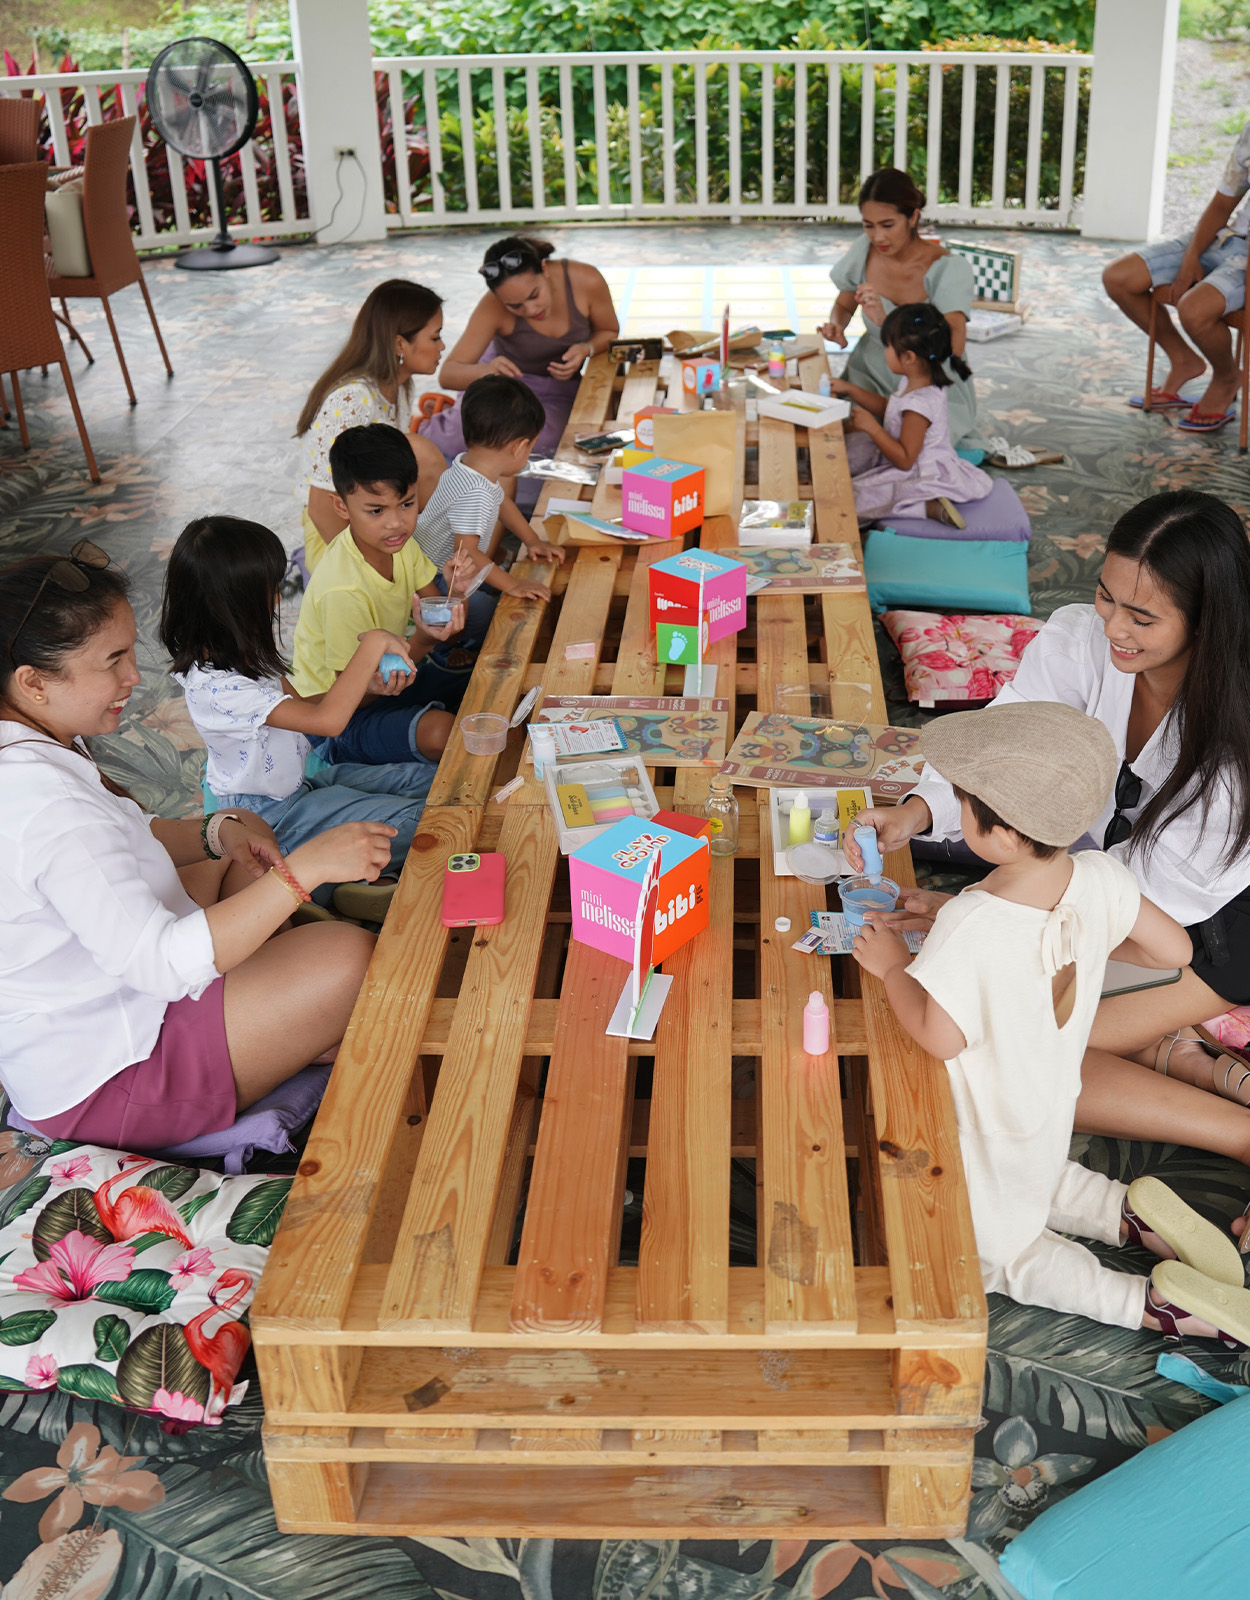 Moms and kids bond at the gazebo over interactive arts and crafts, and educational activities